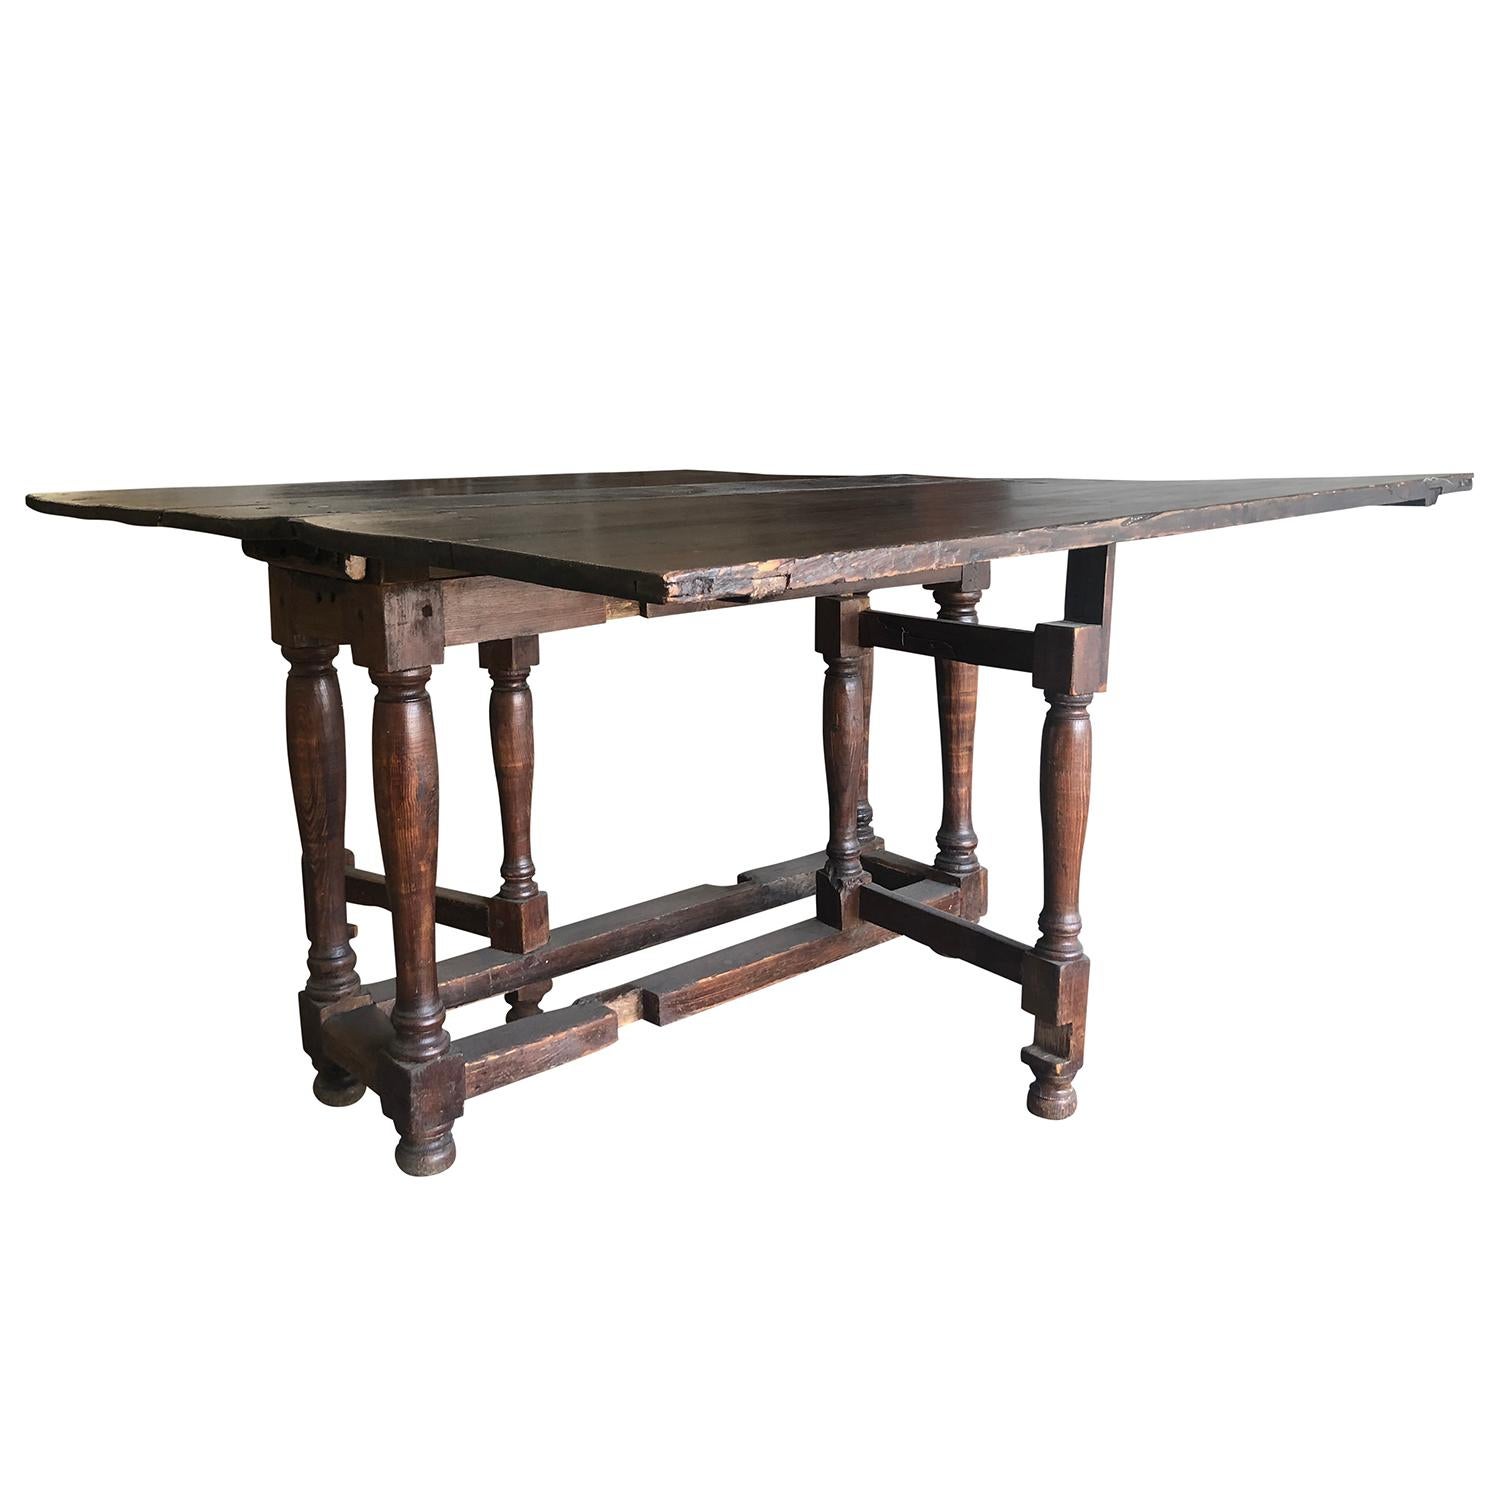 A dark-brown, antique French drop-leaf table from a farmhouse in Normandy, France. Made of hand crafted Walnut with a rustic finish, in good condition. Wear consistent with age and use. circa 18th Century, France.